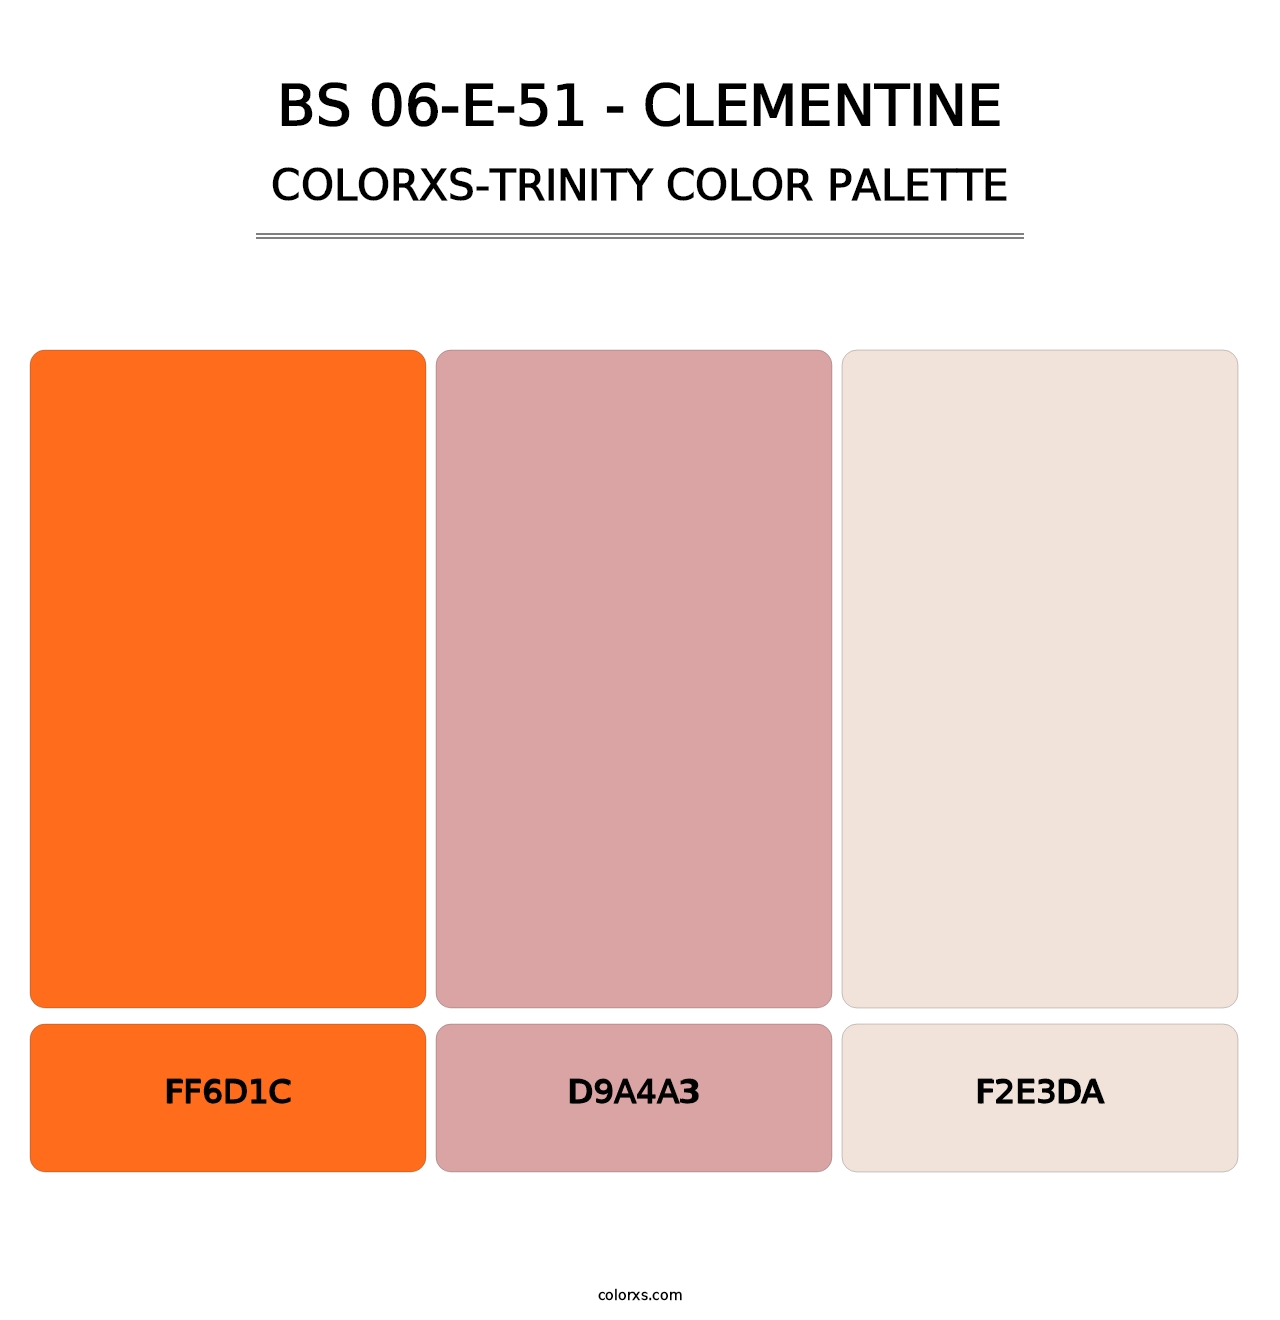 BS 06-E-51 - Clementine - Colorxs Trinity Palette